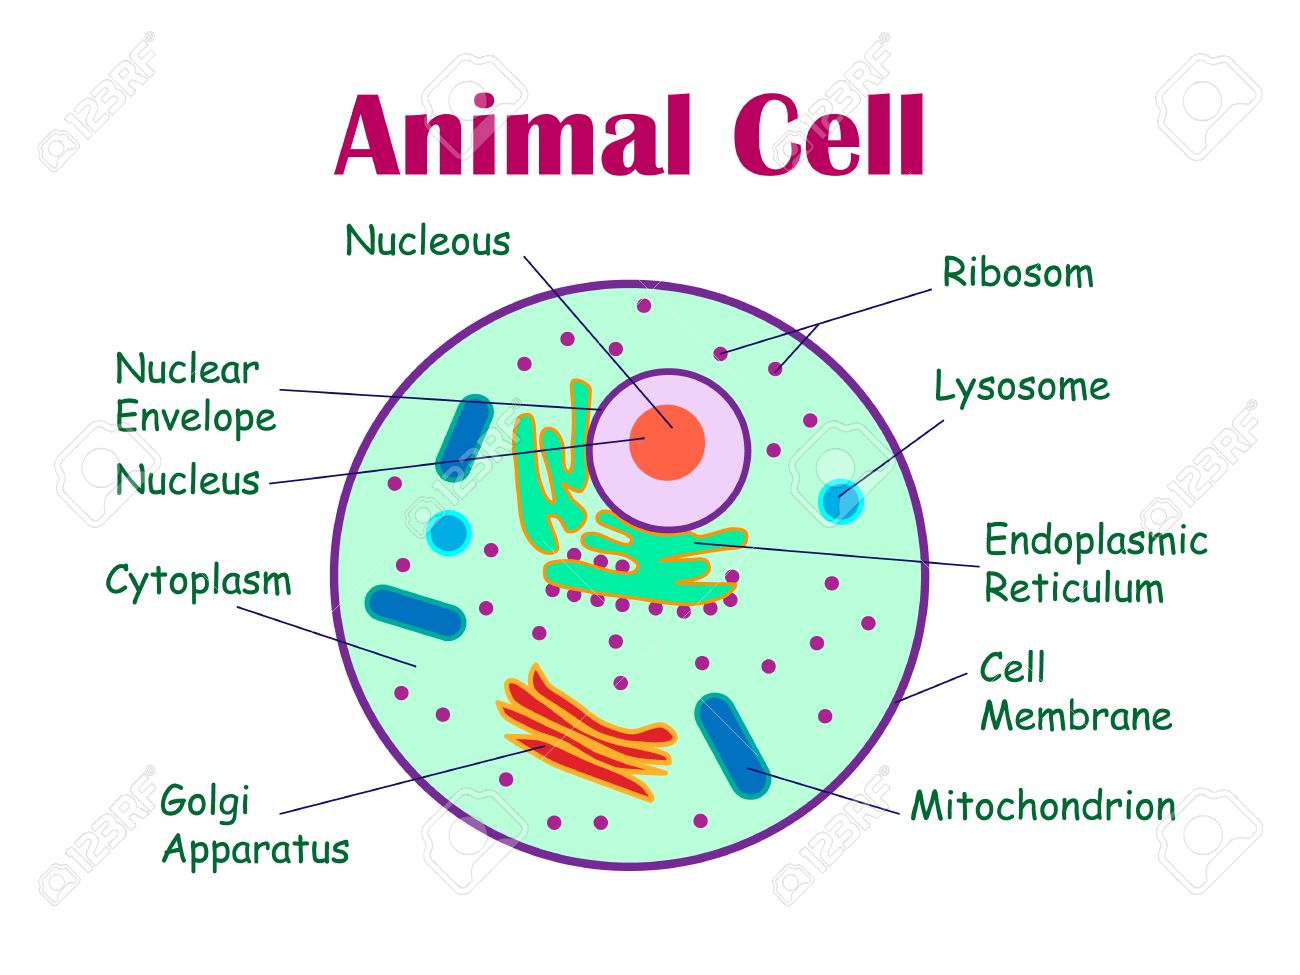 Animal Cells and Plant cells 